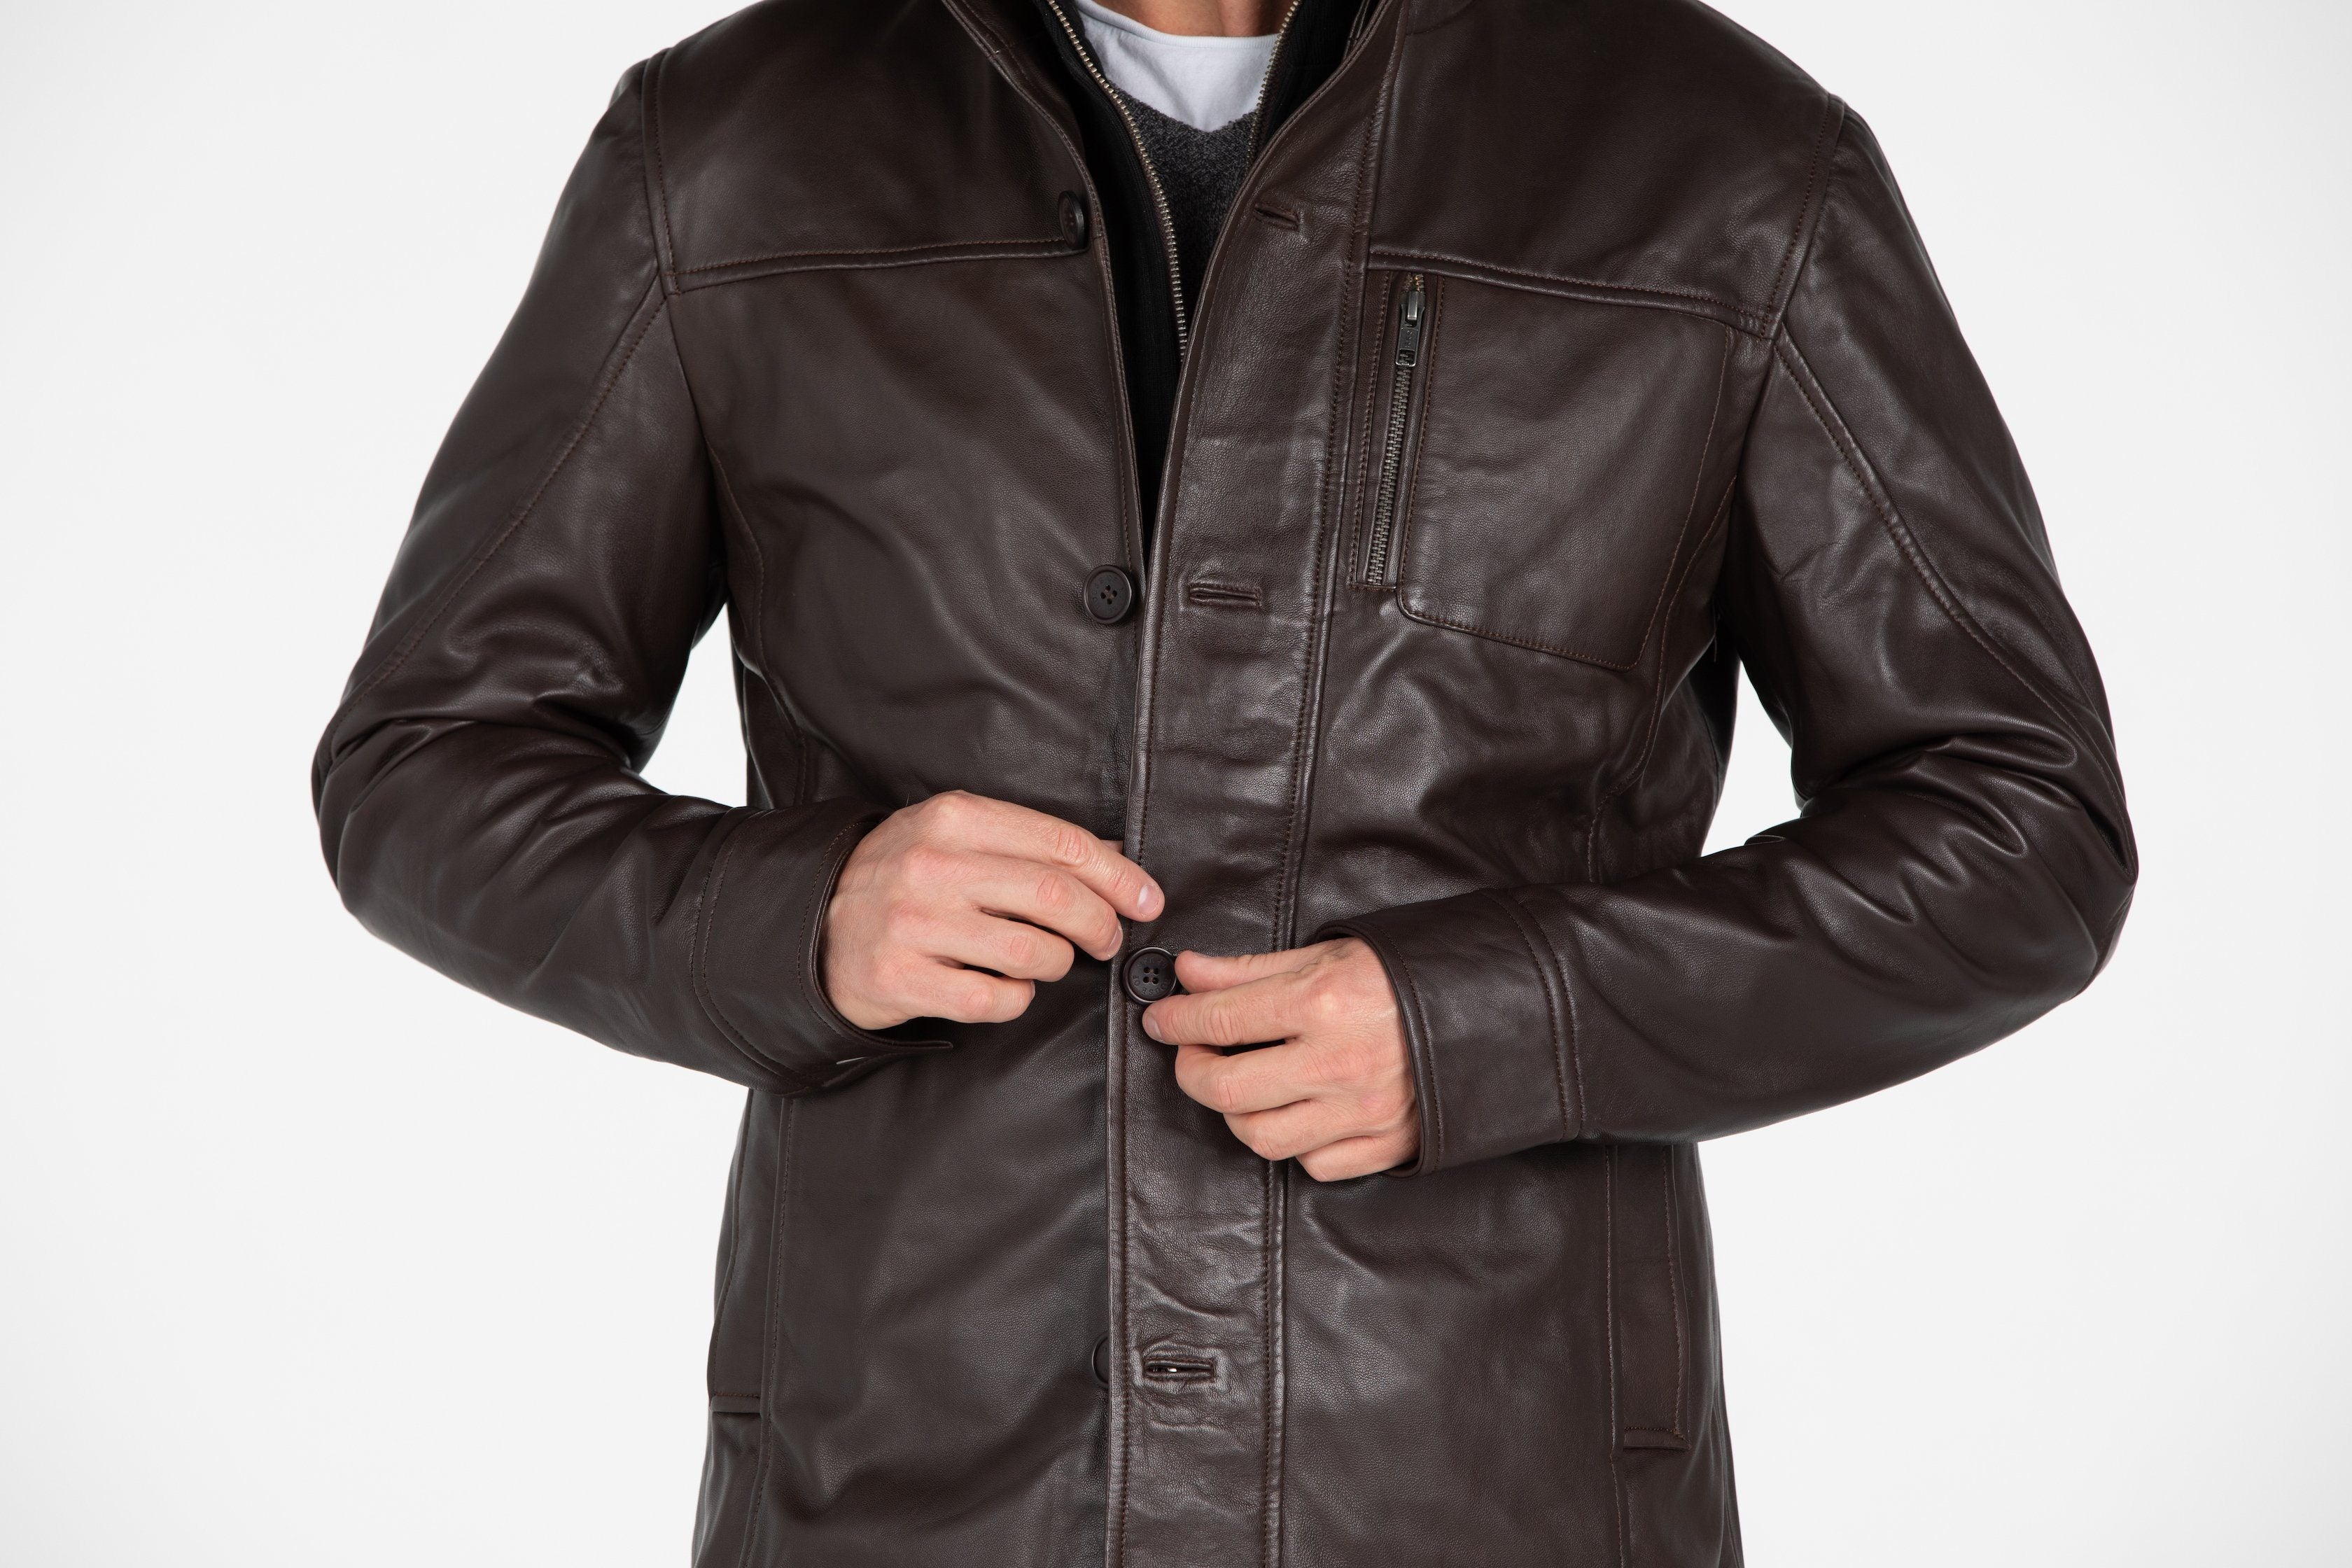 How to Care for and Clean a Leather Jacket - Dependable Cleaners